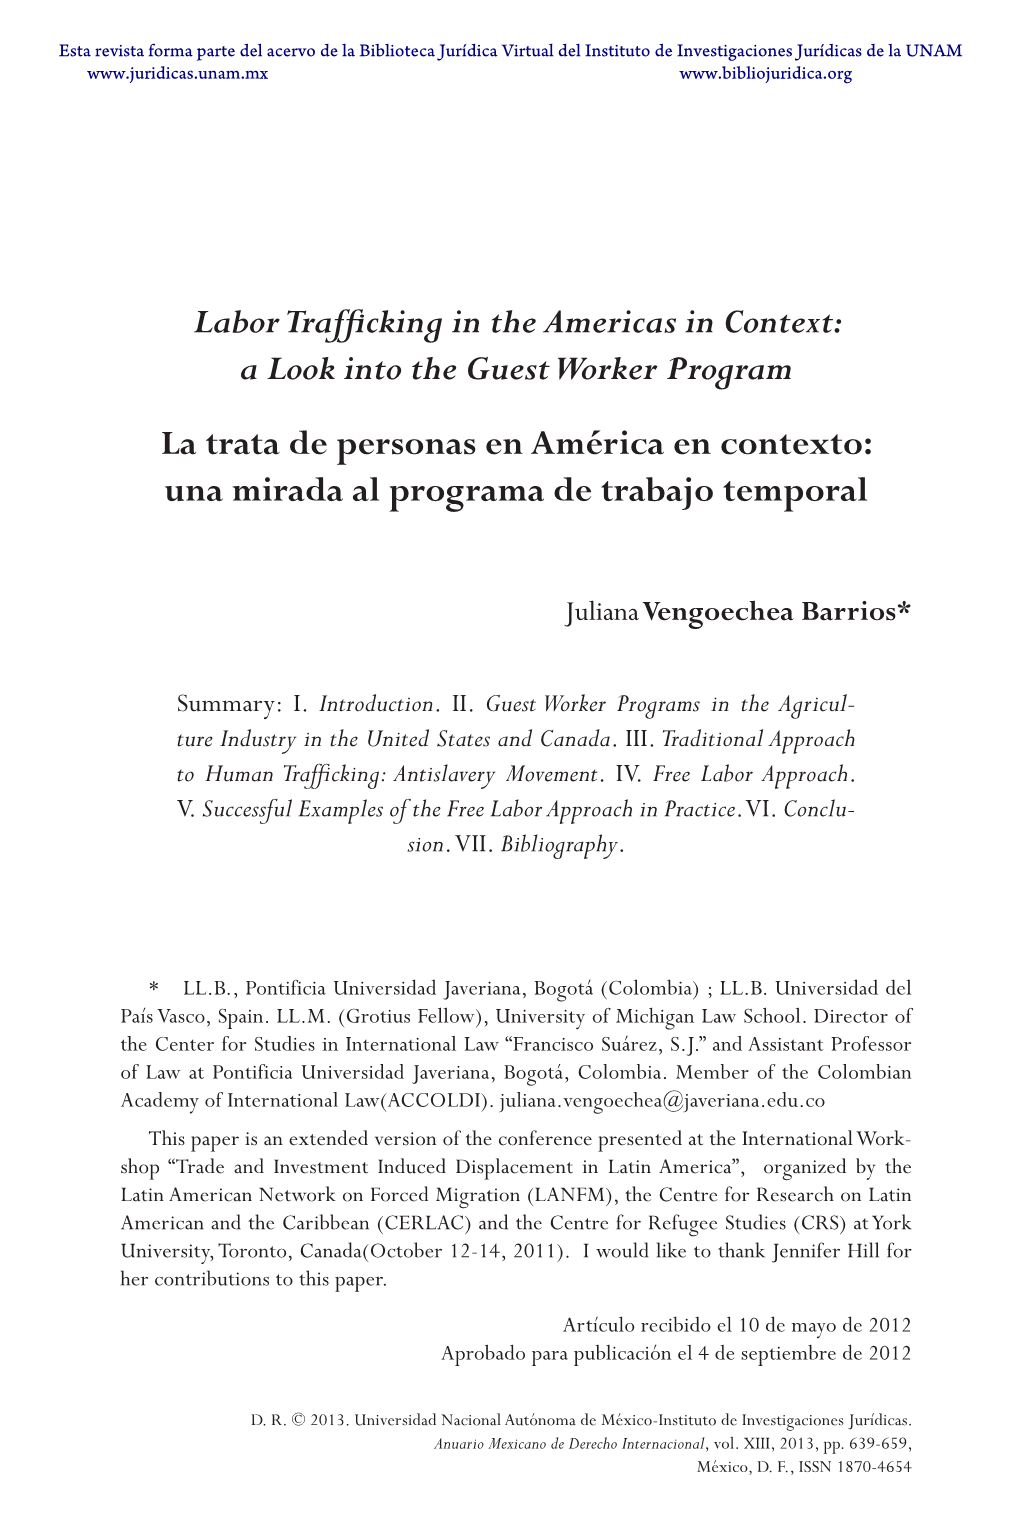 Labor Trafficking in the Americas in Context: a Look Into the Guest